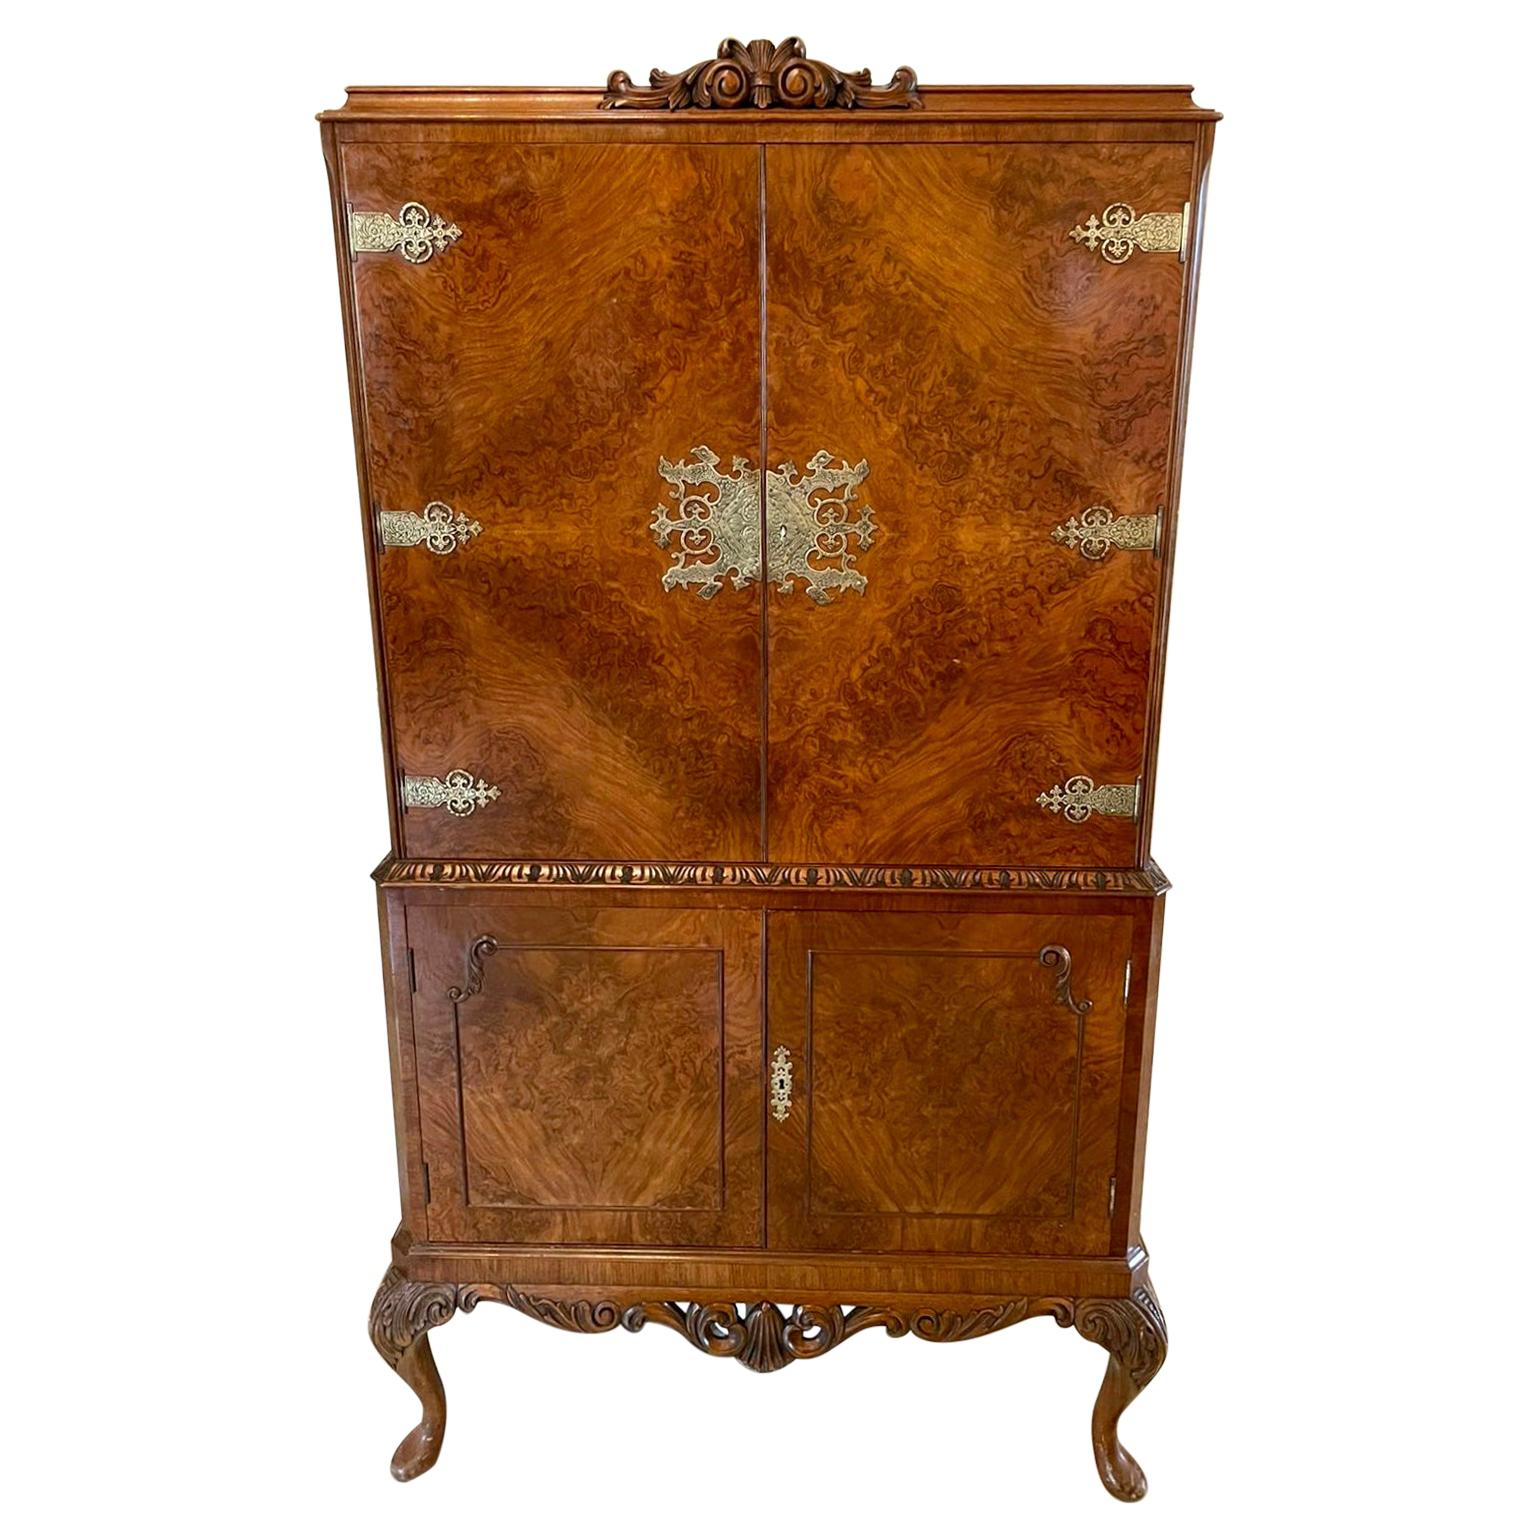 Outstanding Quality Antique Burr Walnut Cocktail Cabinet For Sale